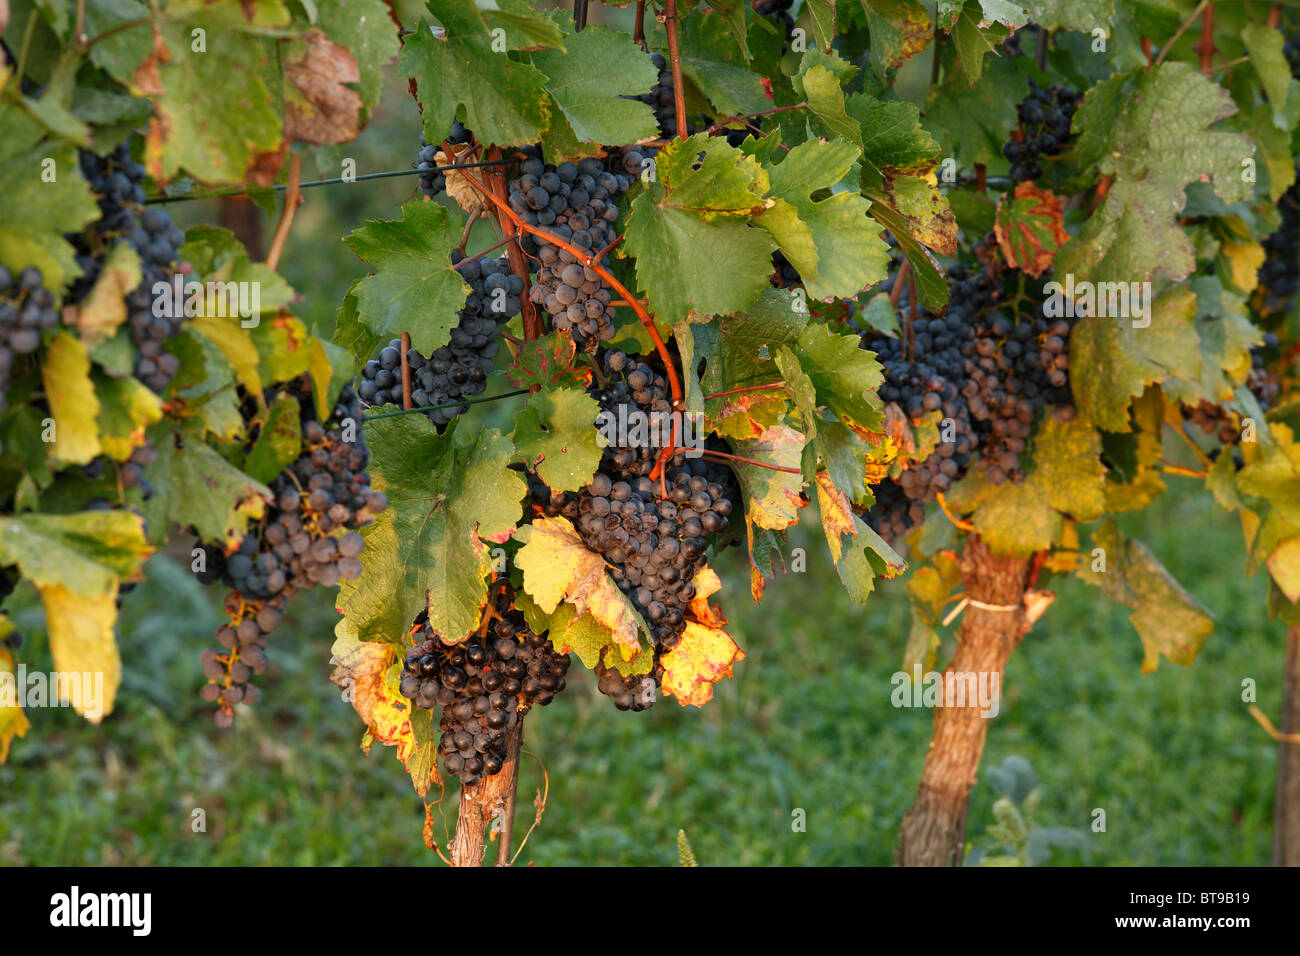 Vines with ripe red grapes, Burgenland, Austria, Europe Stock Photo